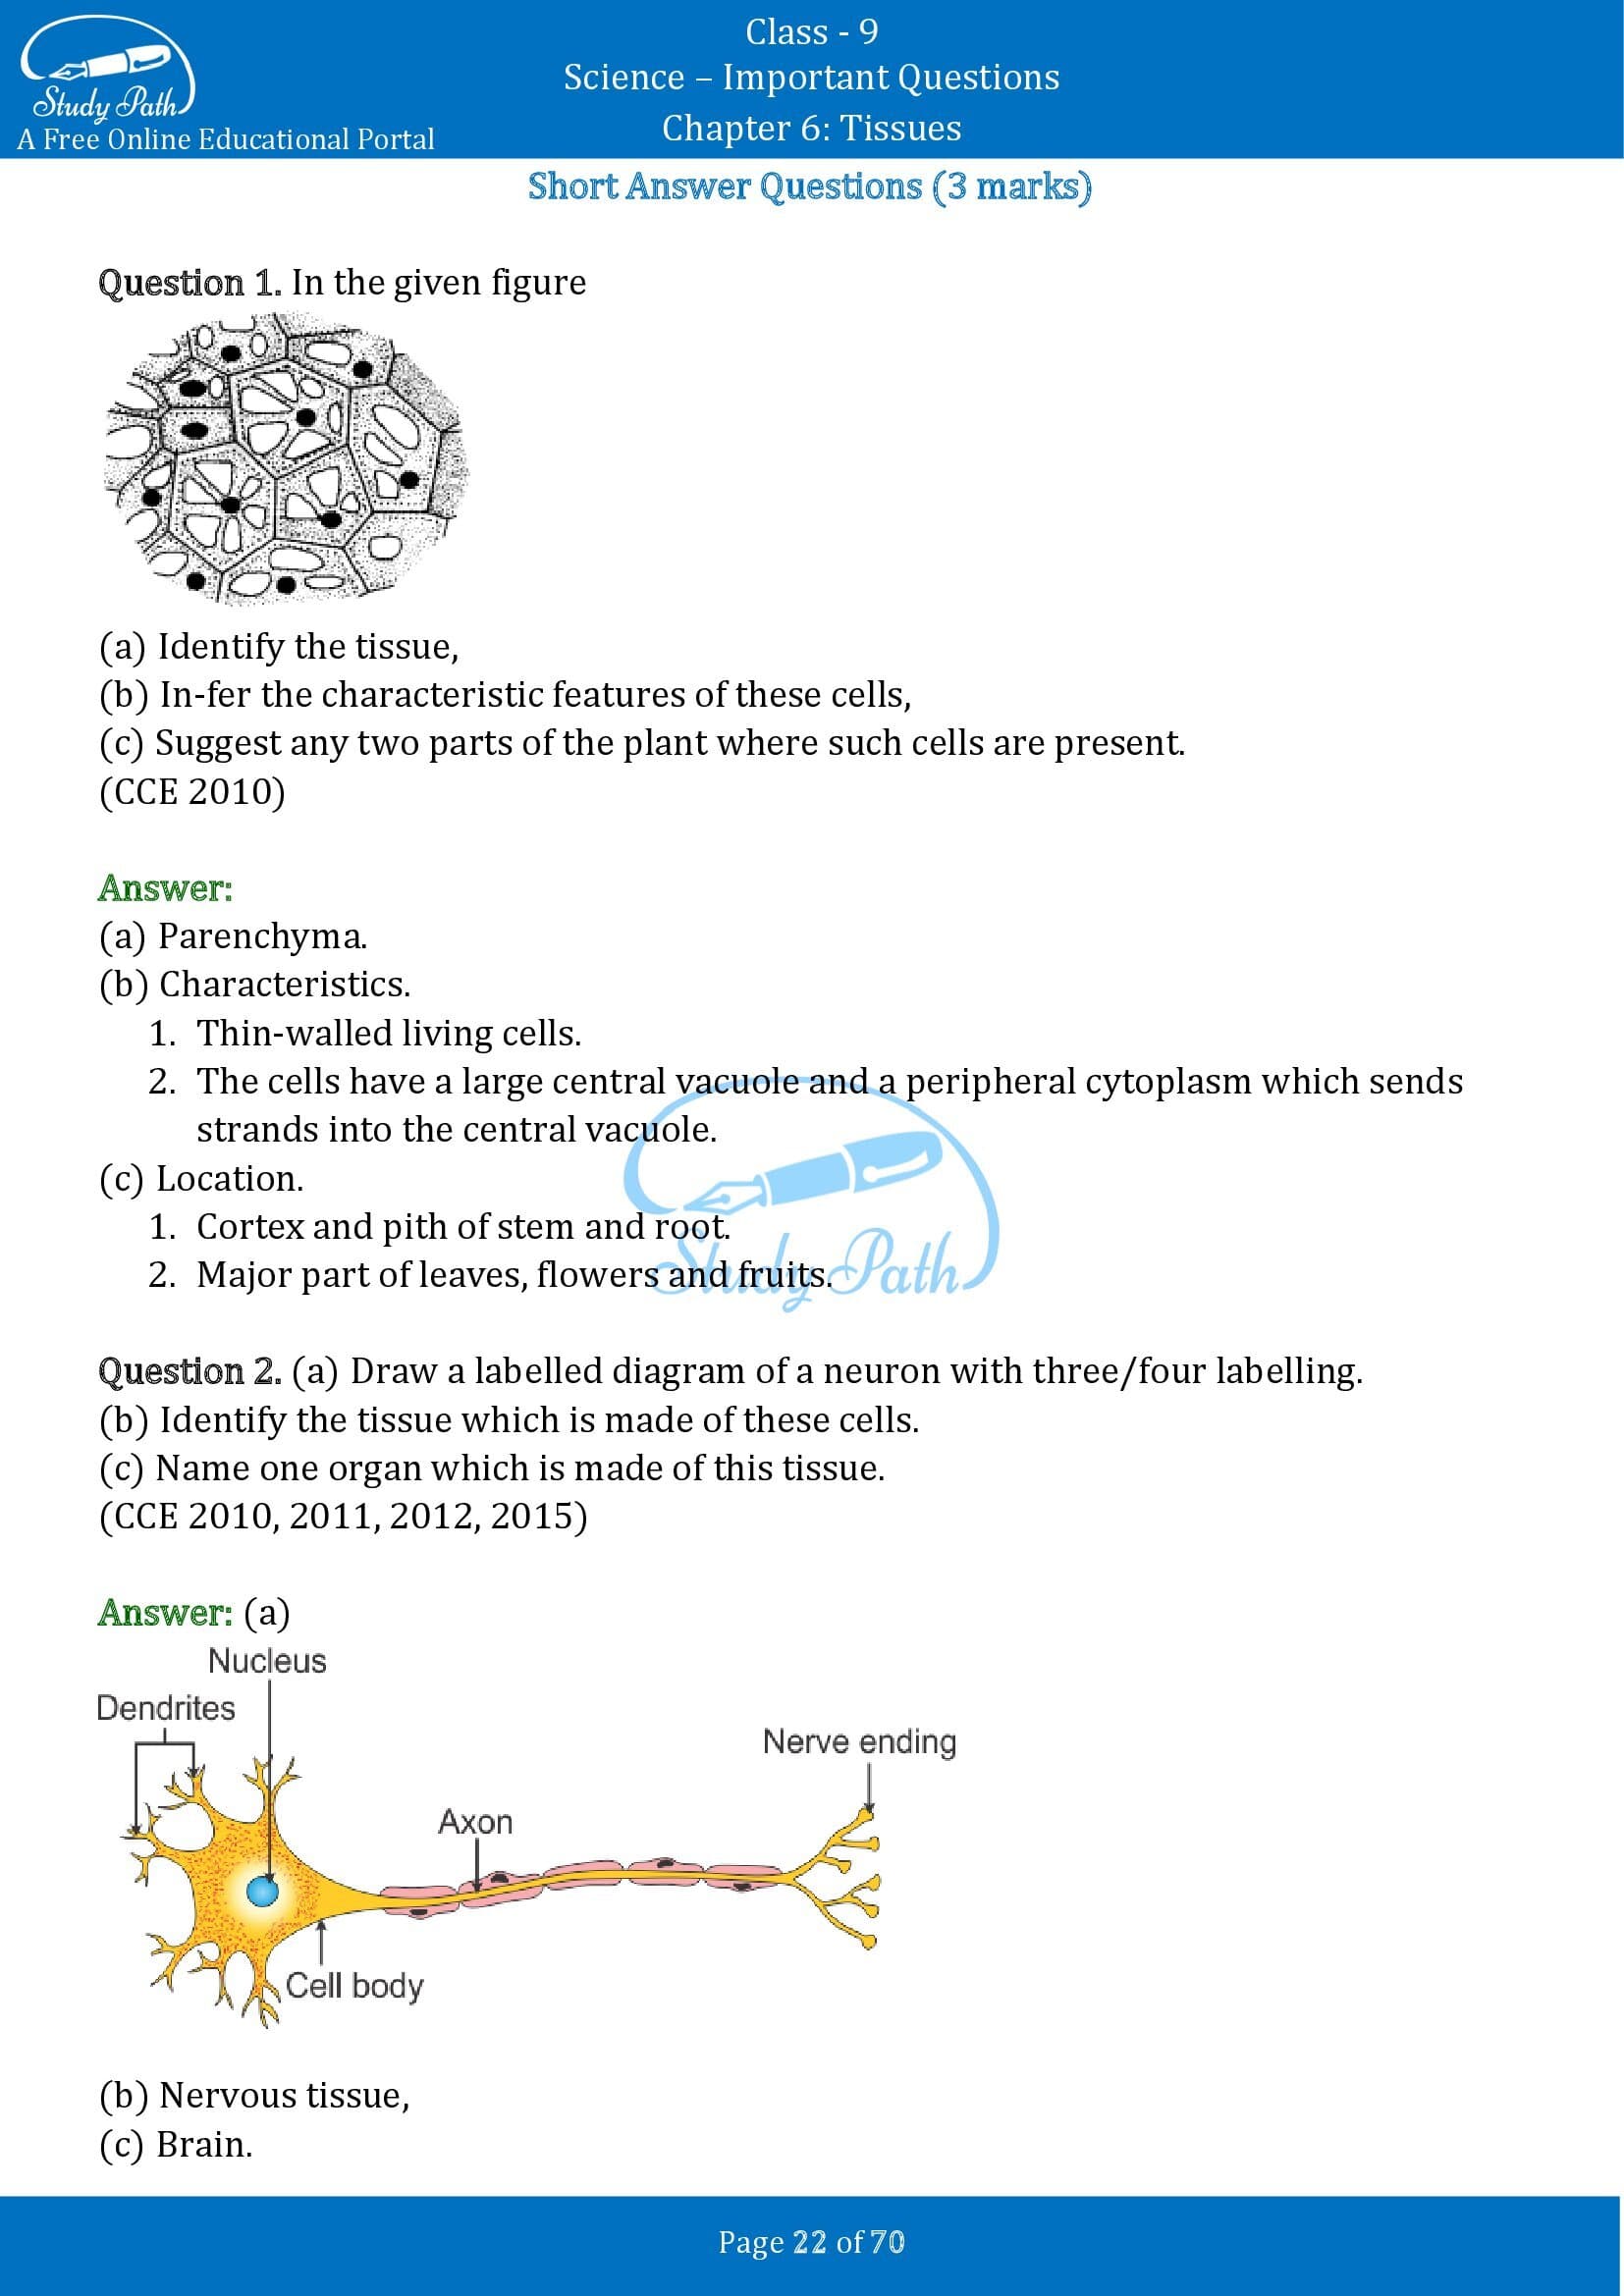 Important Questions for Class 9 Science Chapter 6 Tissues 00022